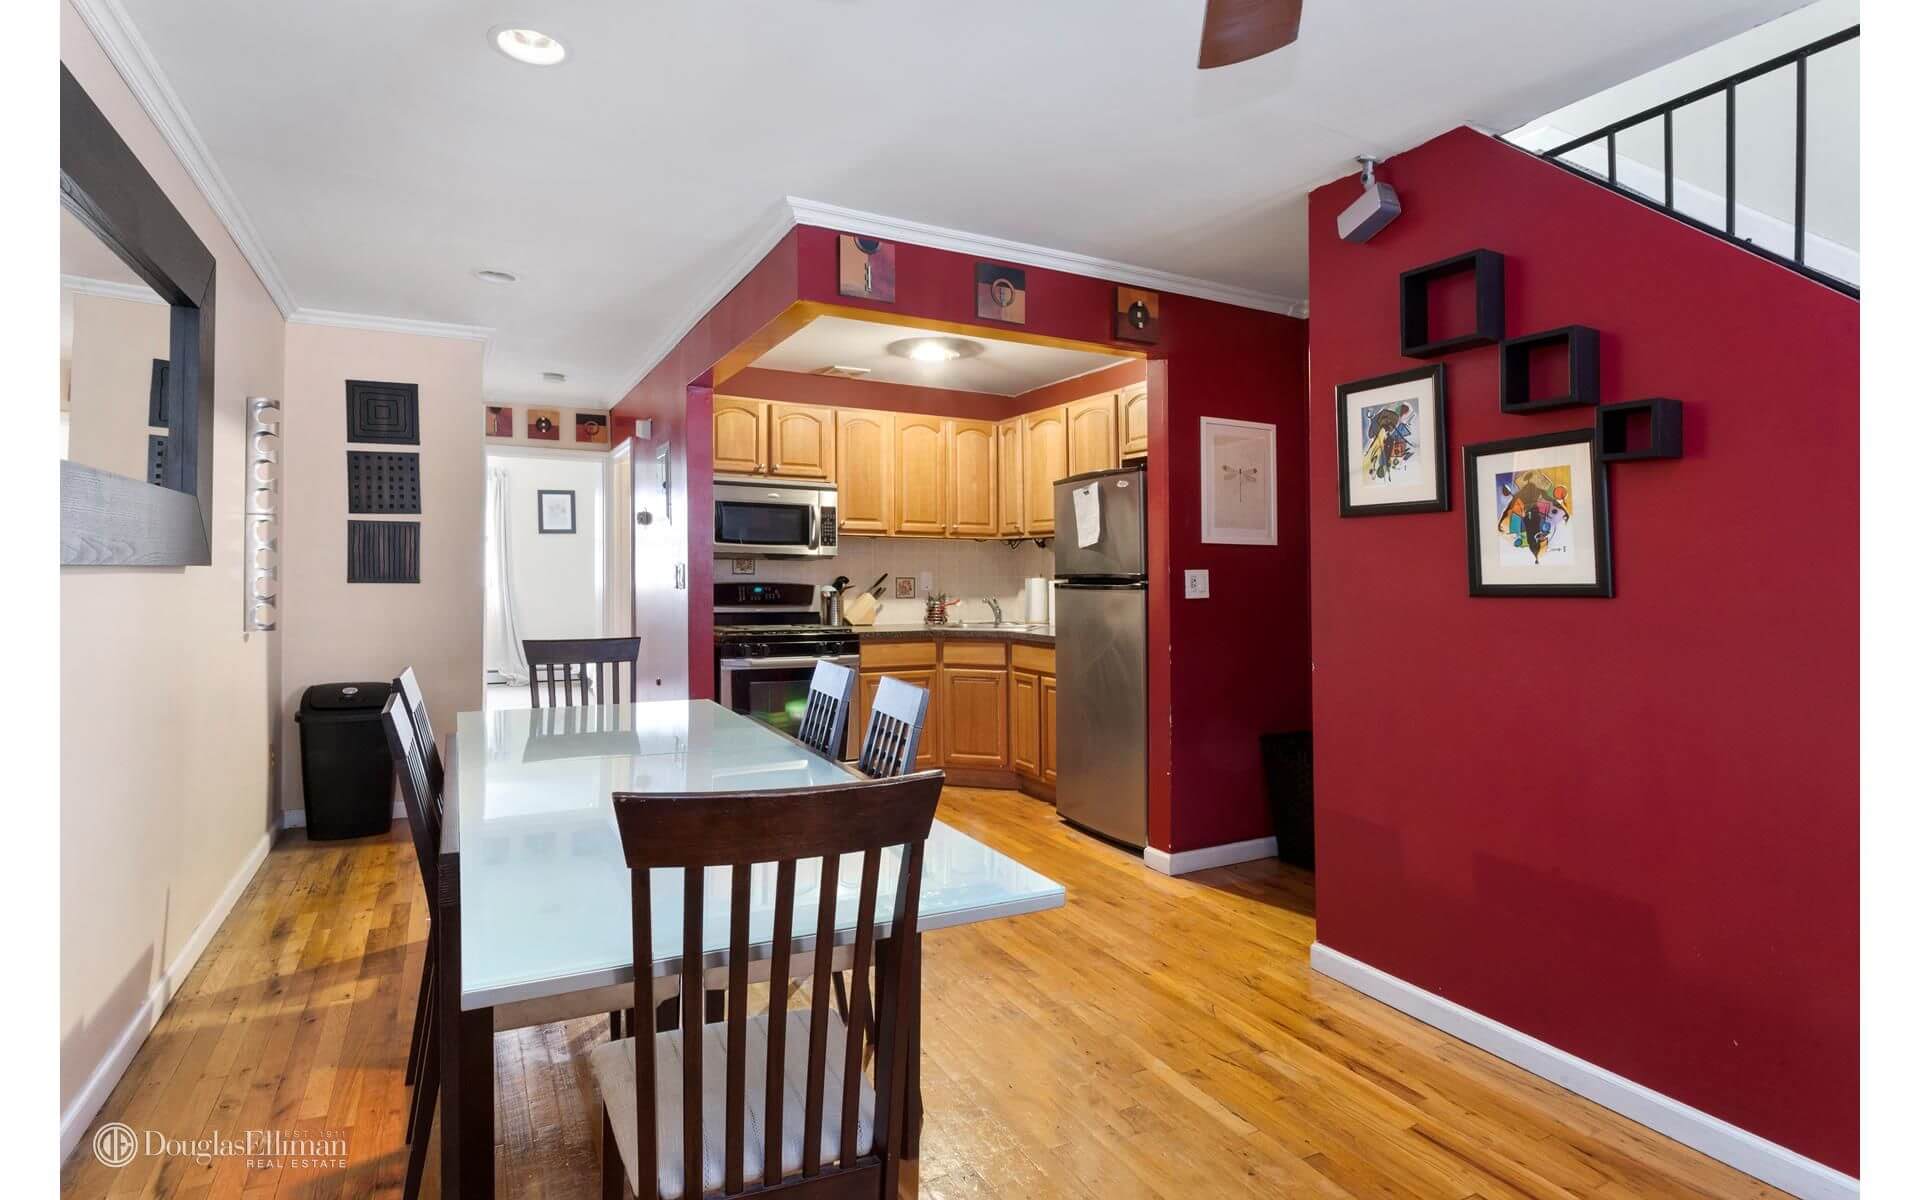 Brooklyn Homes for Sale in Crown Heights, Flatbush, Bed Stuy, Canarsie